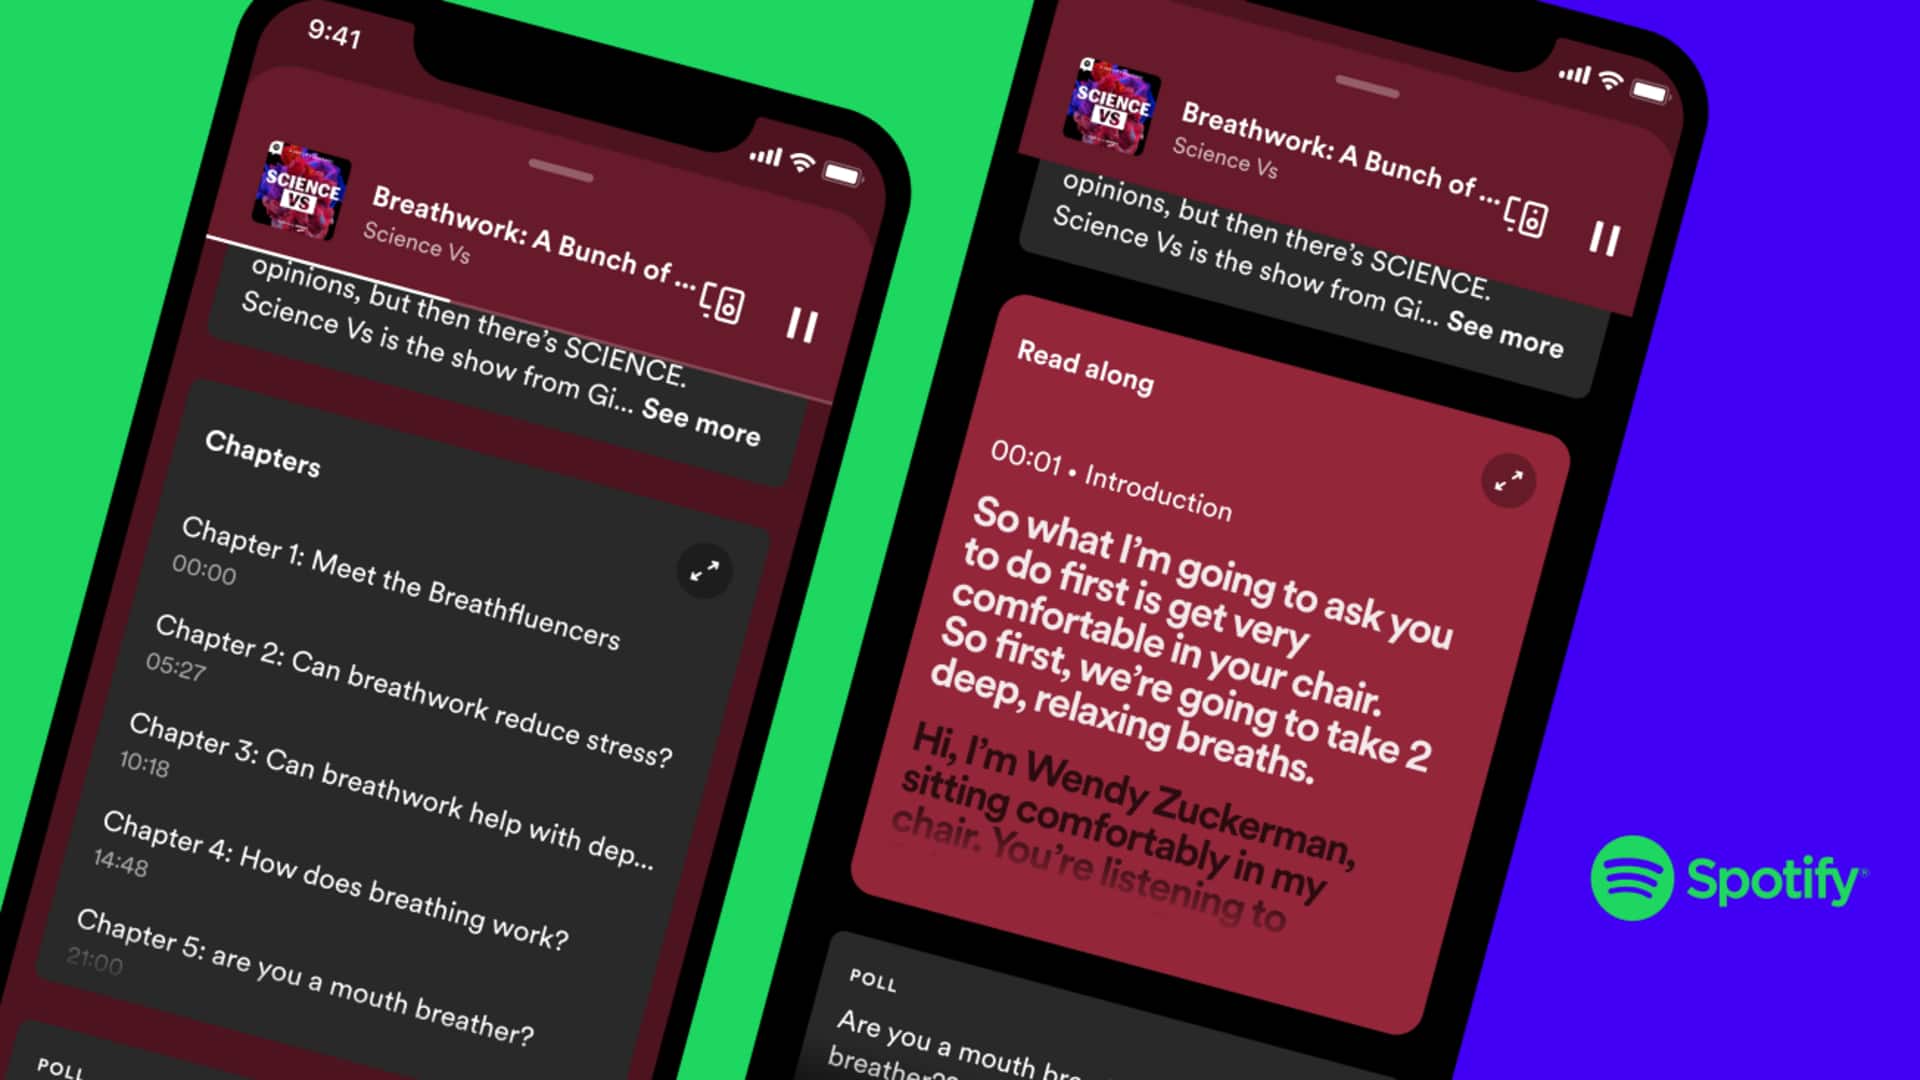 Spotify adds auto-generated transcripts for podcasts: How to use